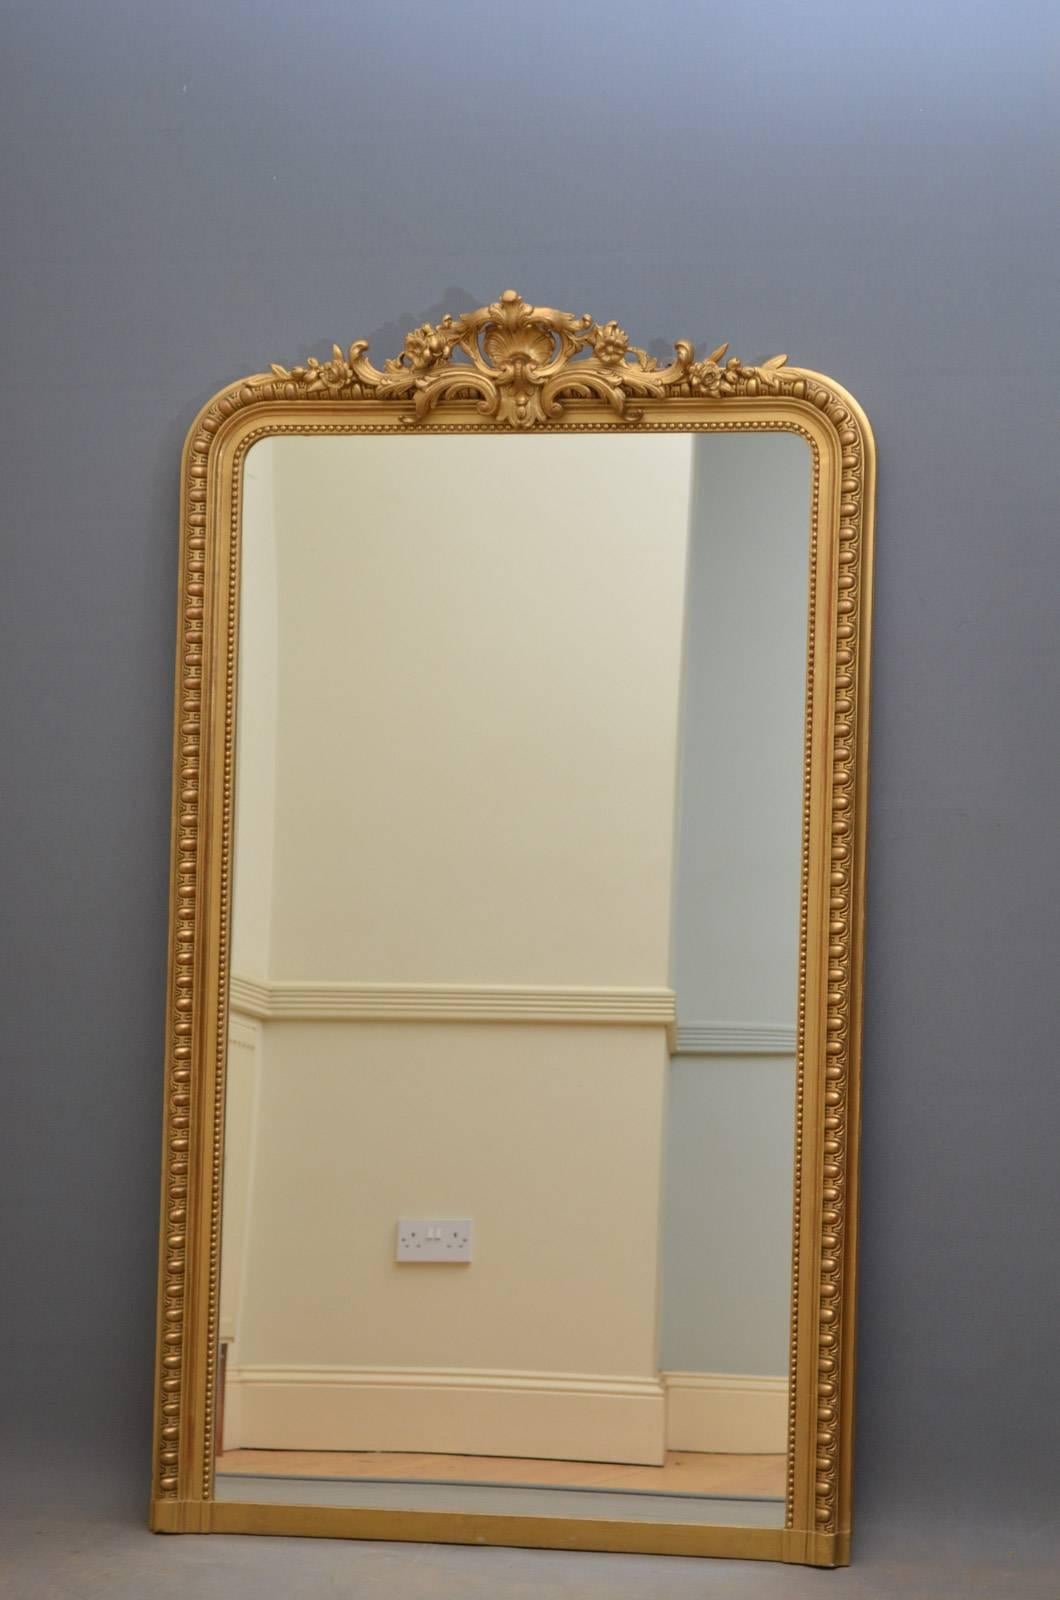 K0246 A 19th century giltwood mirror, having fine shell decoration to centre flanked by floral motifs and finely carved frame. This antique has been refinished and is fantastic condition throughout – ready to place at home. circa 1880
Measures: H